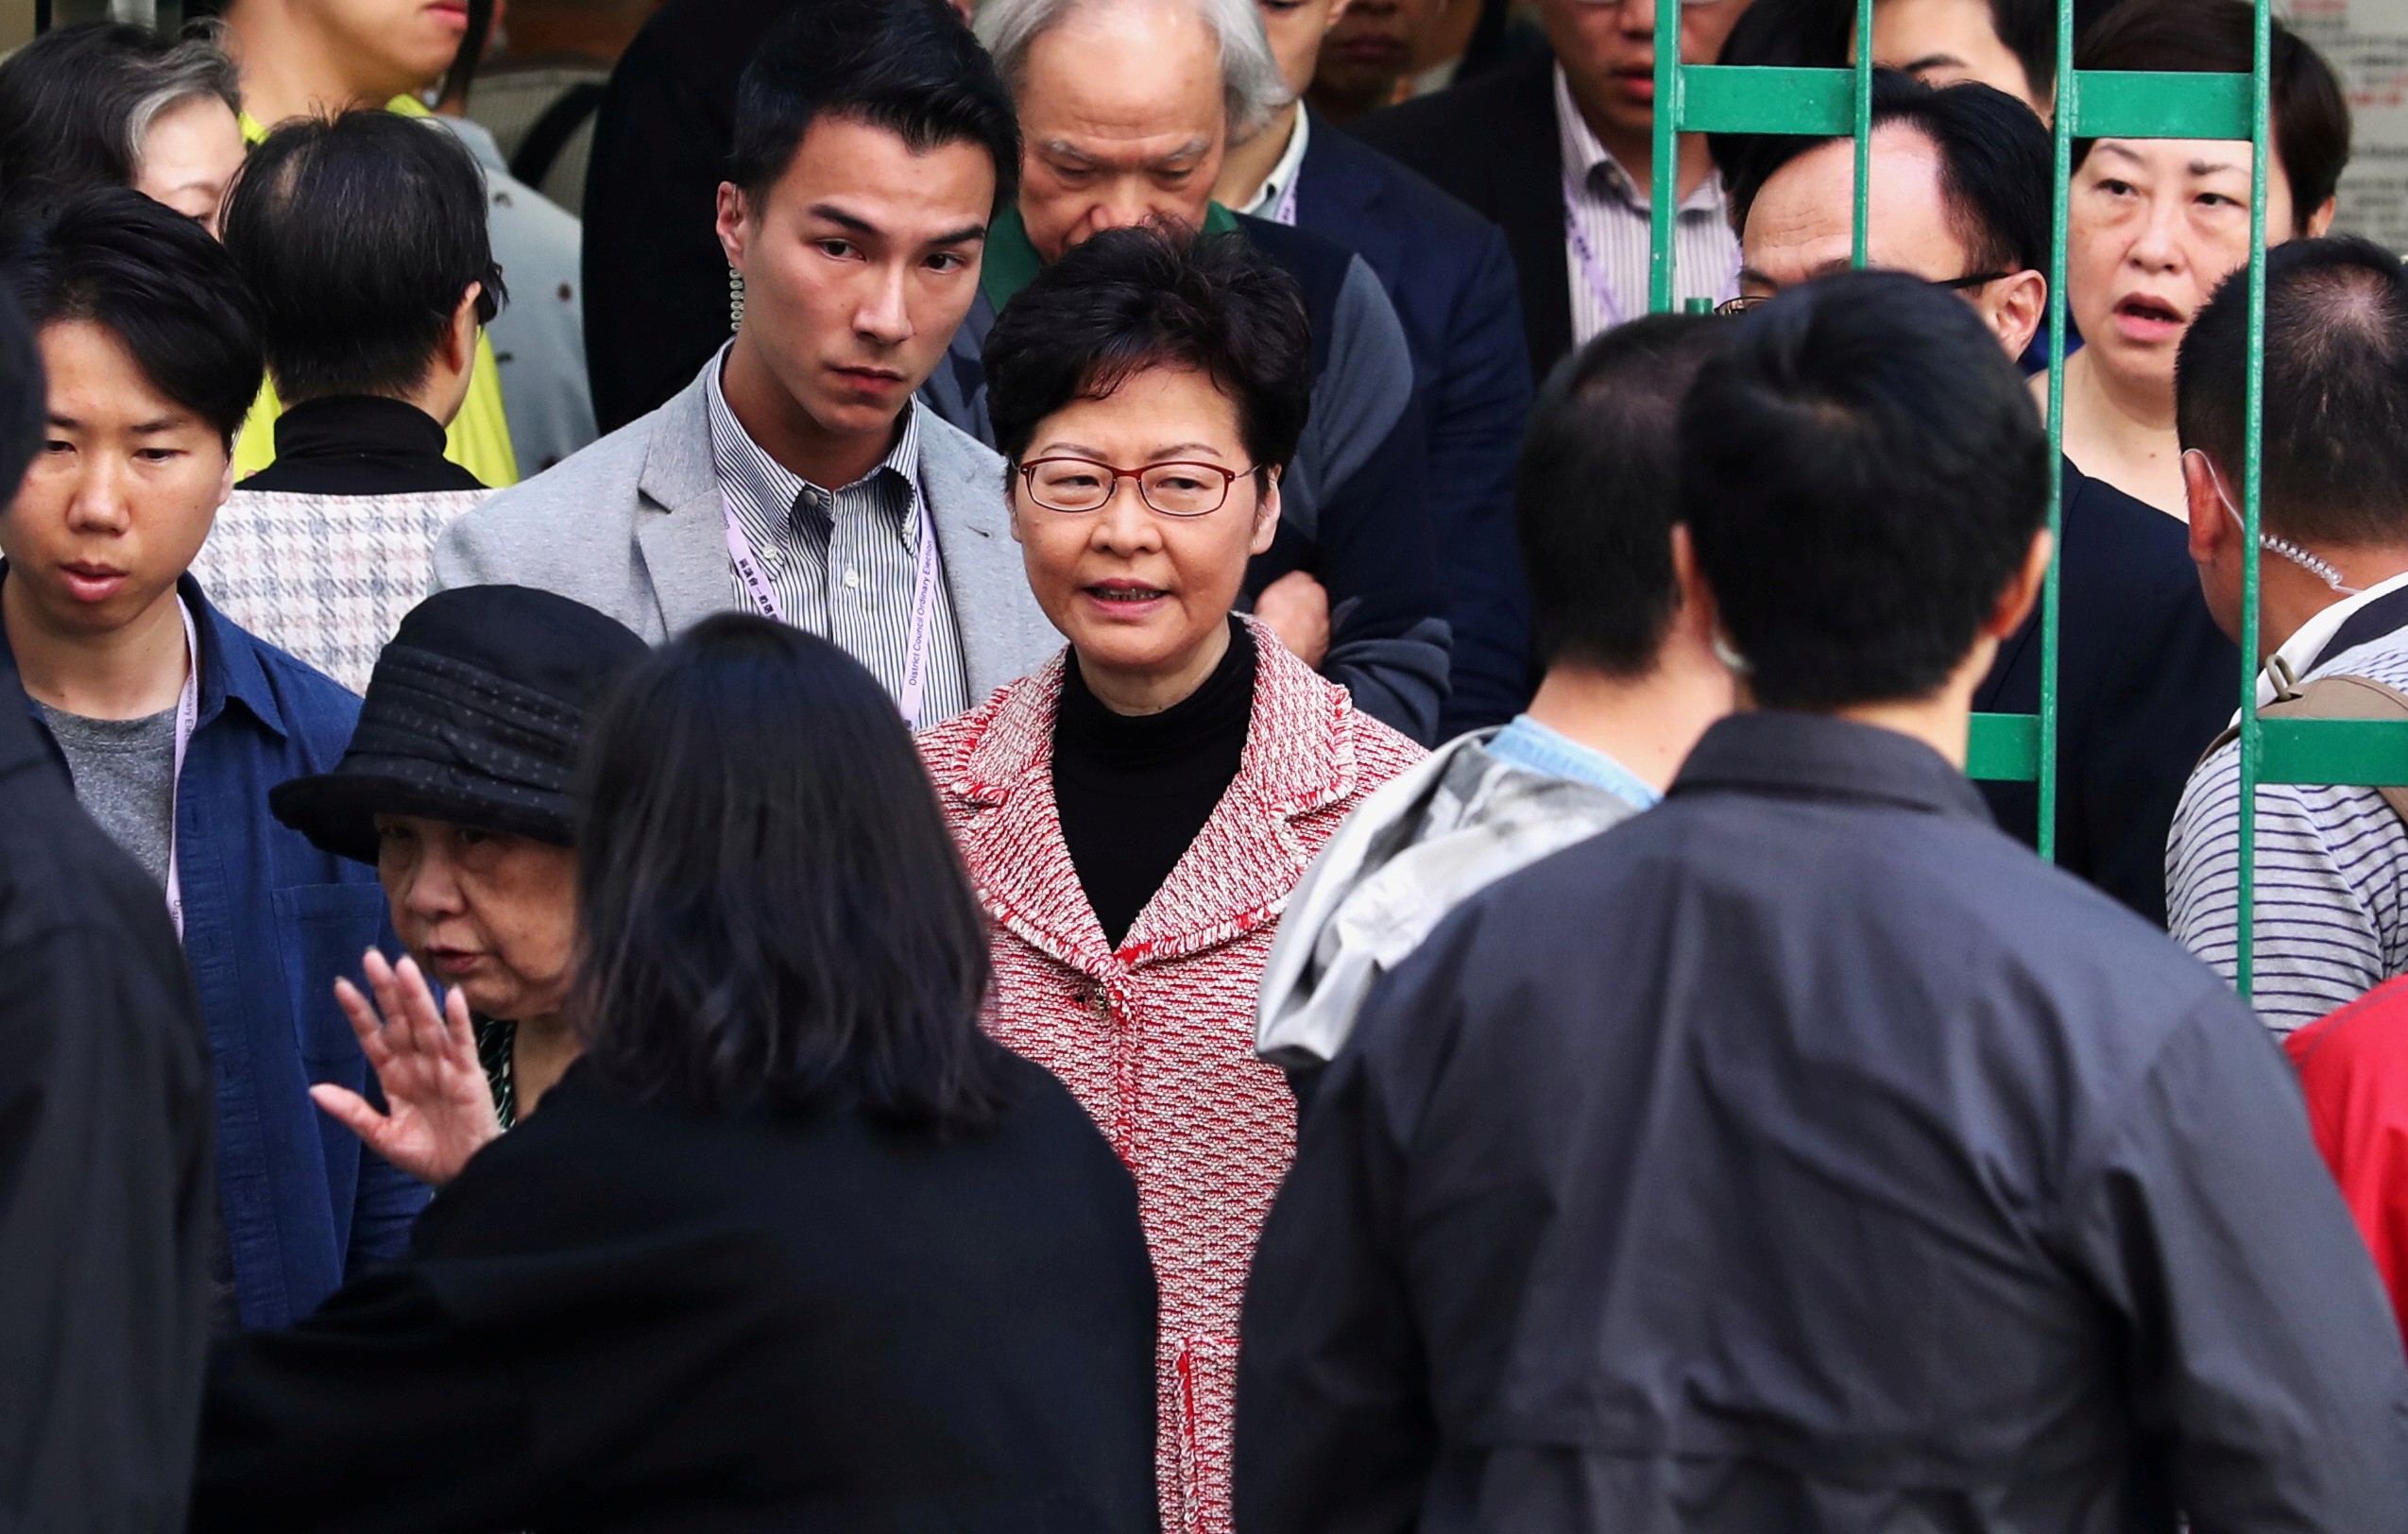 Hong Kong Chief Executive Carrie Lam leaves after voting at a polling station during the district council elections on November 24. Photo: Reuters